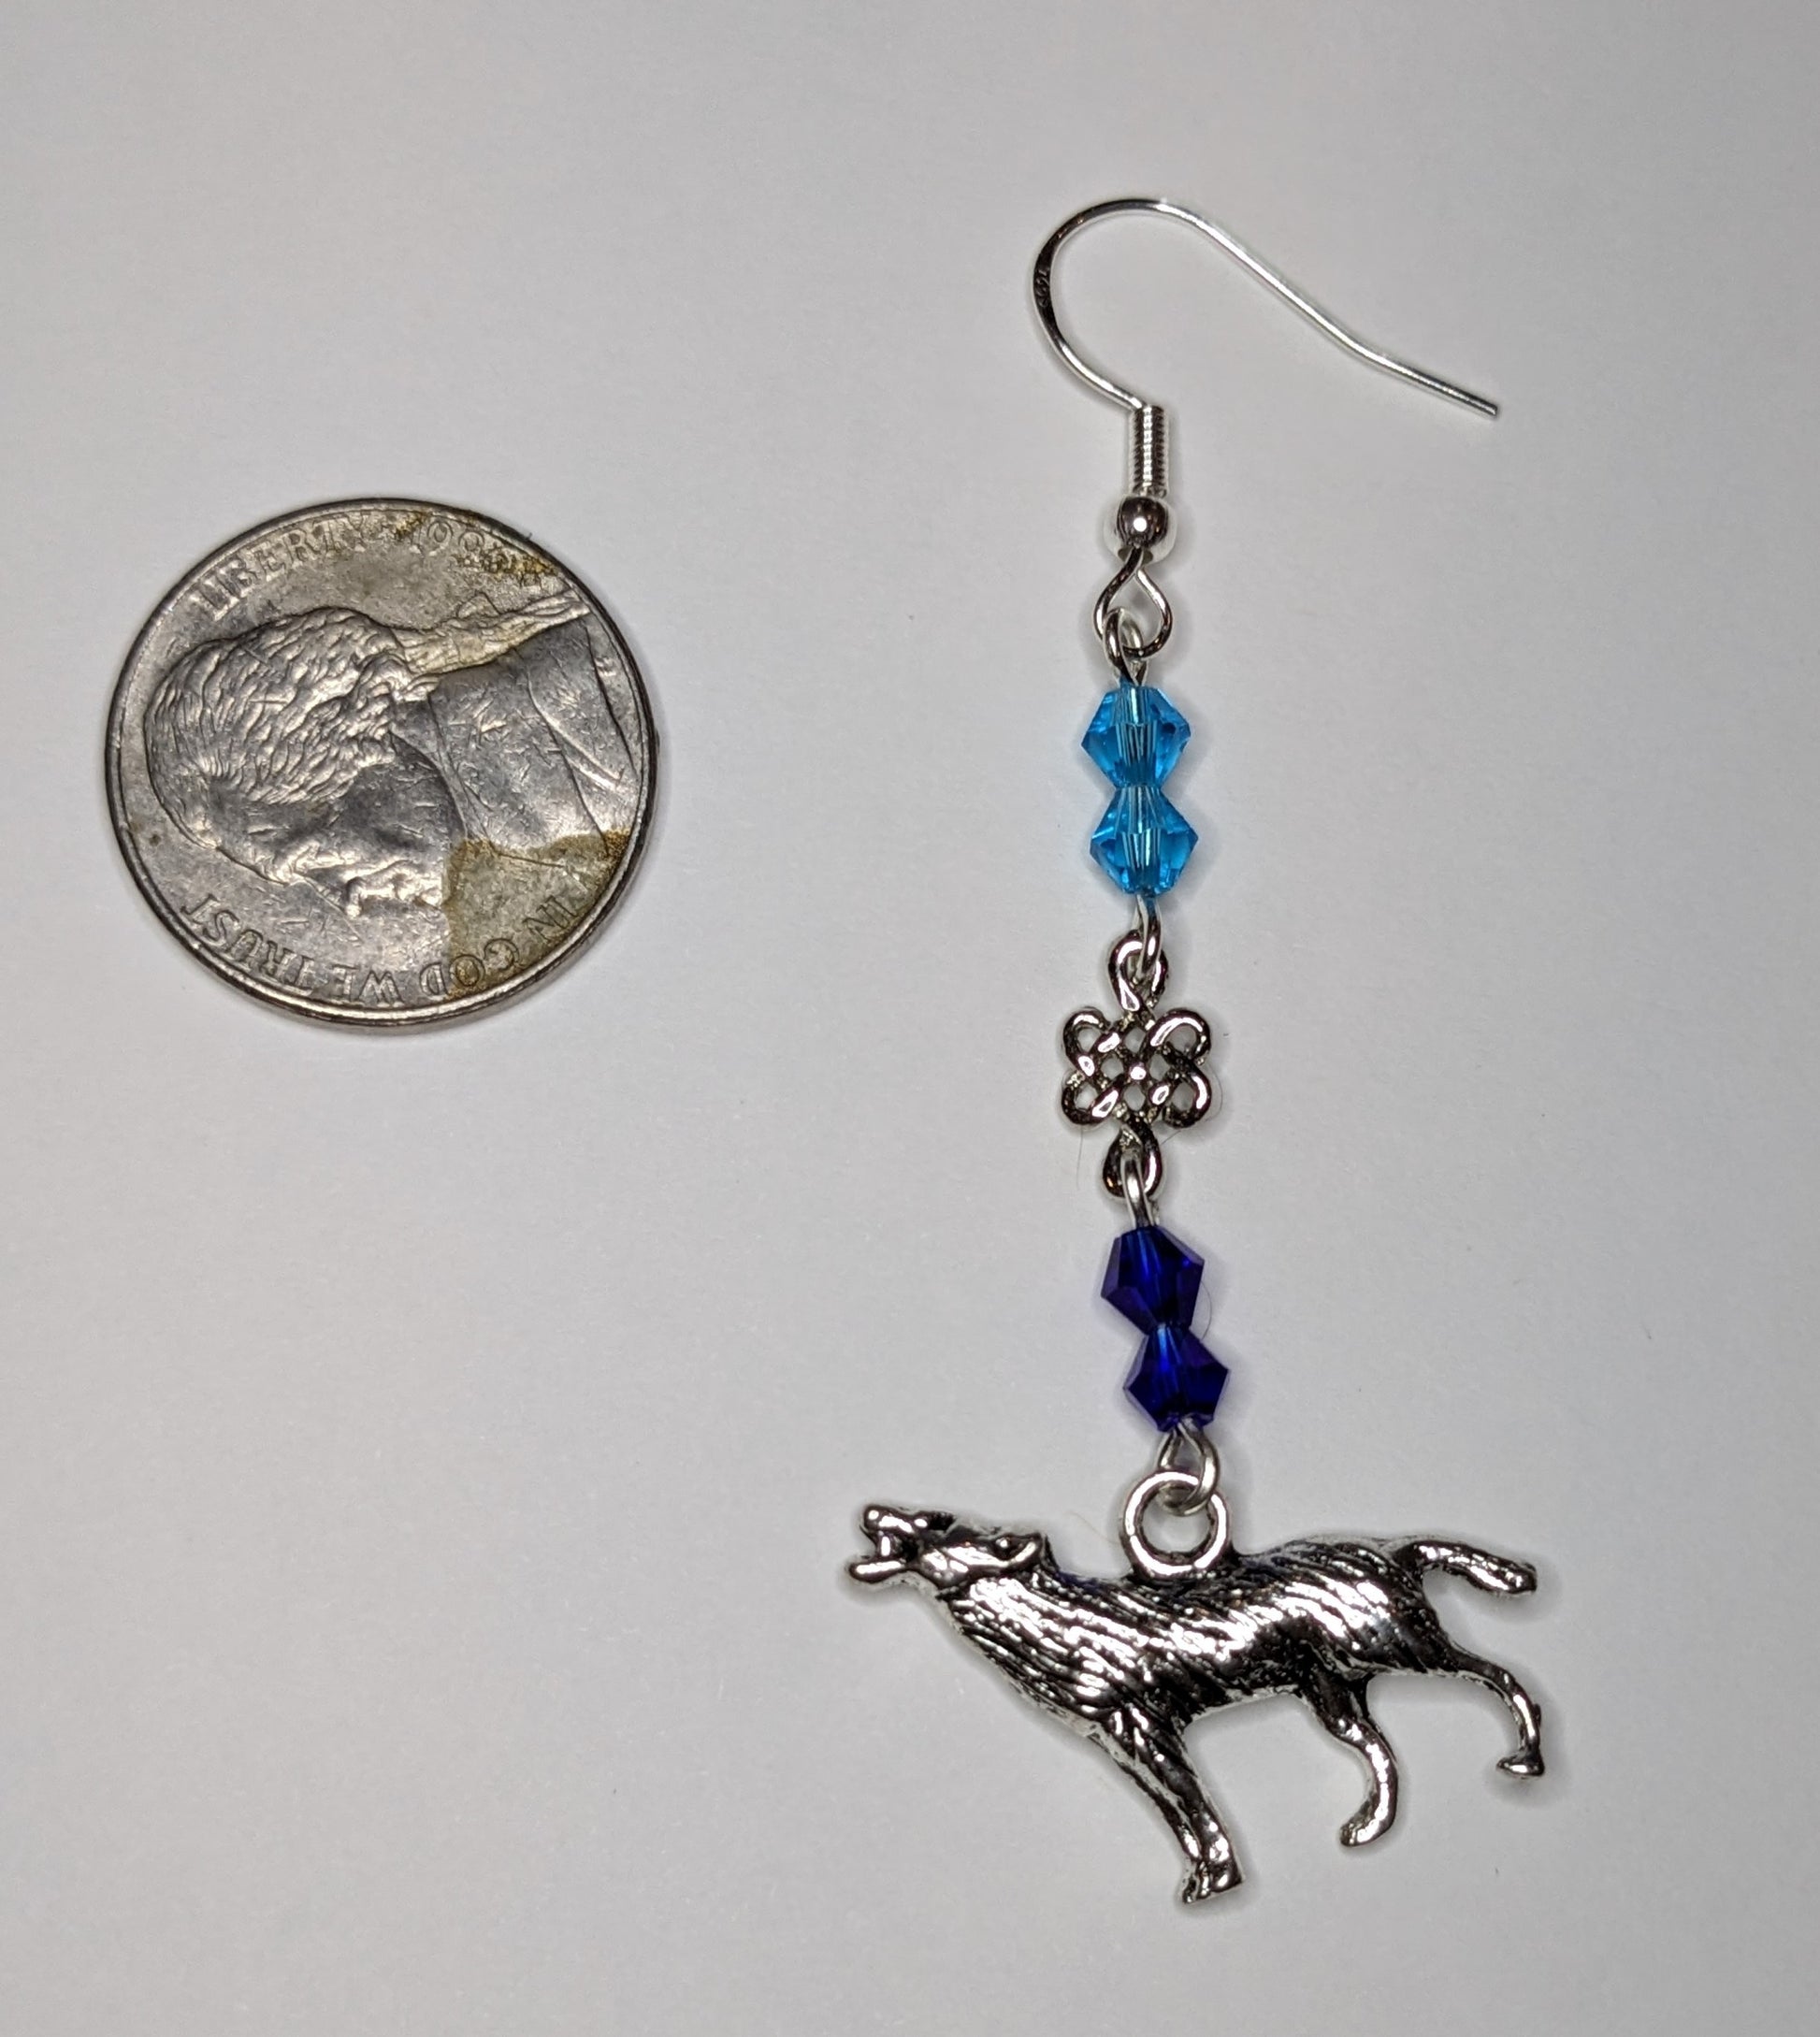 Close up of a single earring with silver howling wolf charm at the bottom and faceted bicone crystal beads in light blue & dark blue separated by a silver Celtic knot connector. Earring is next to a nickel to show scale 